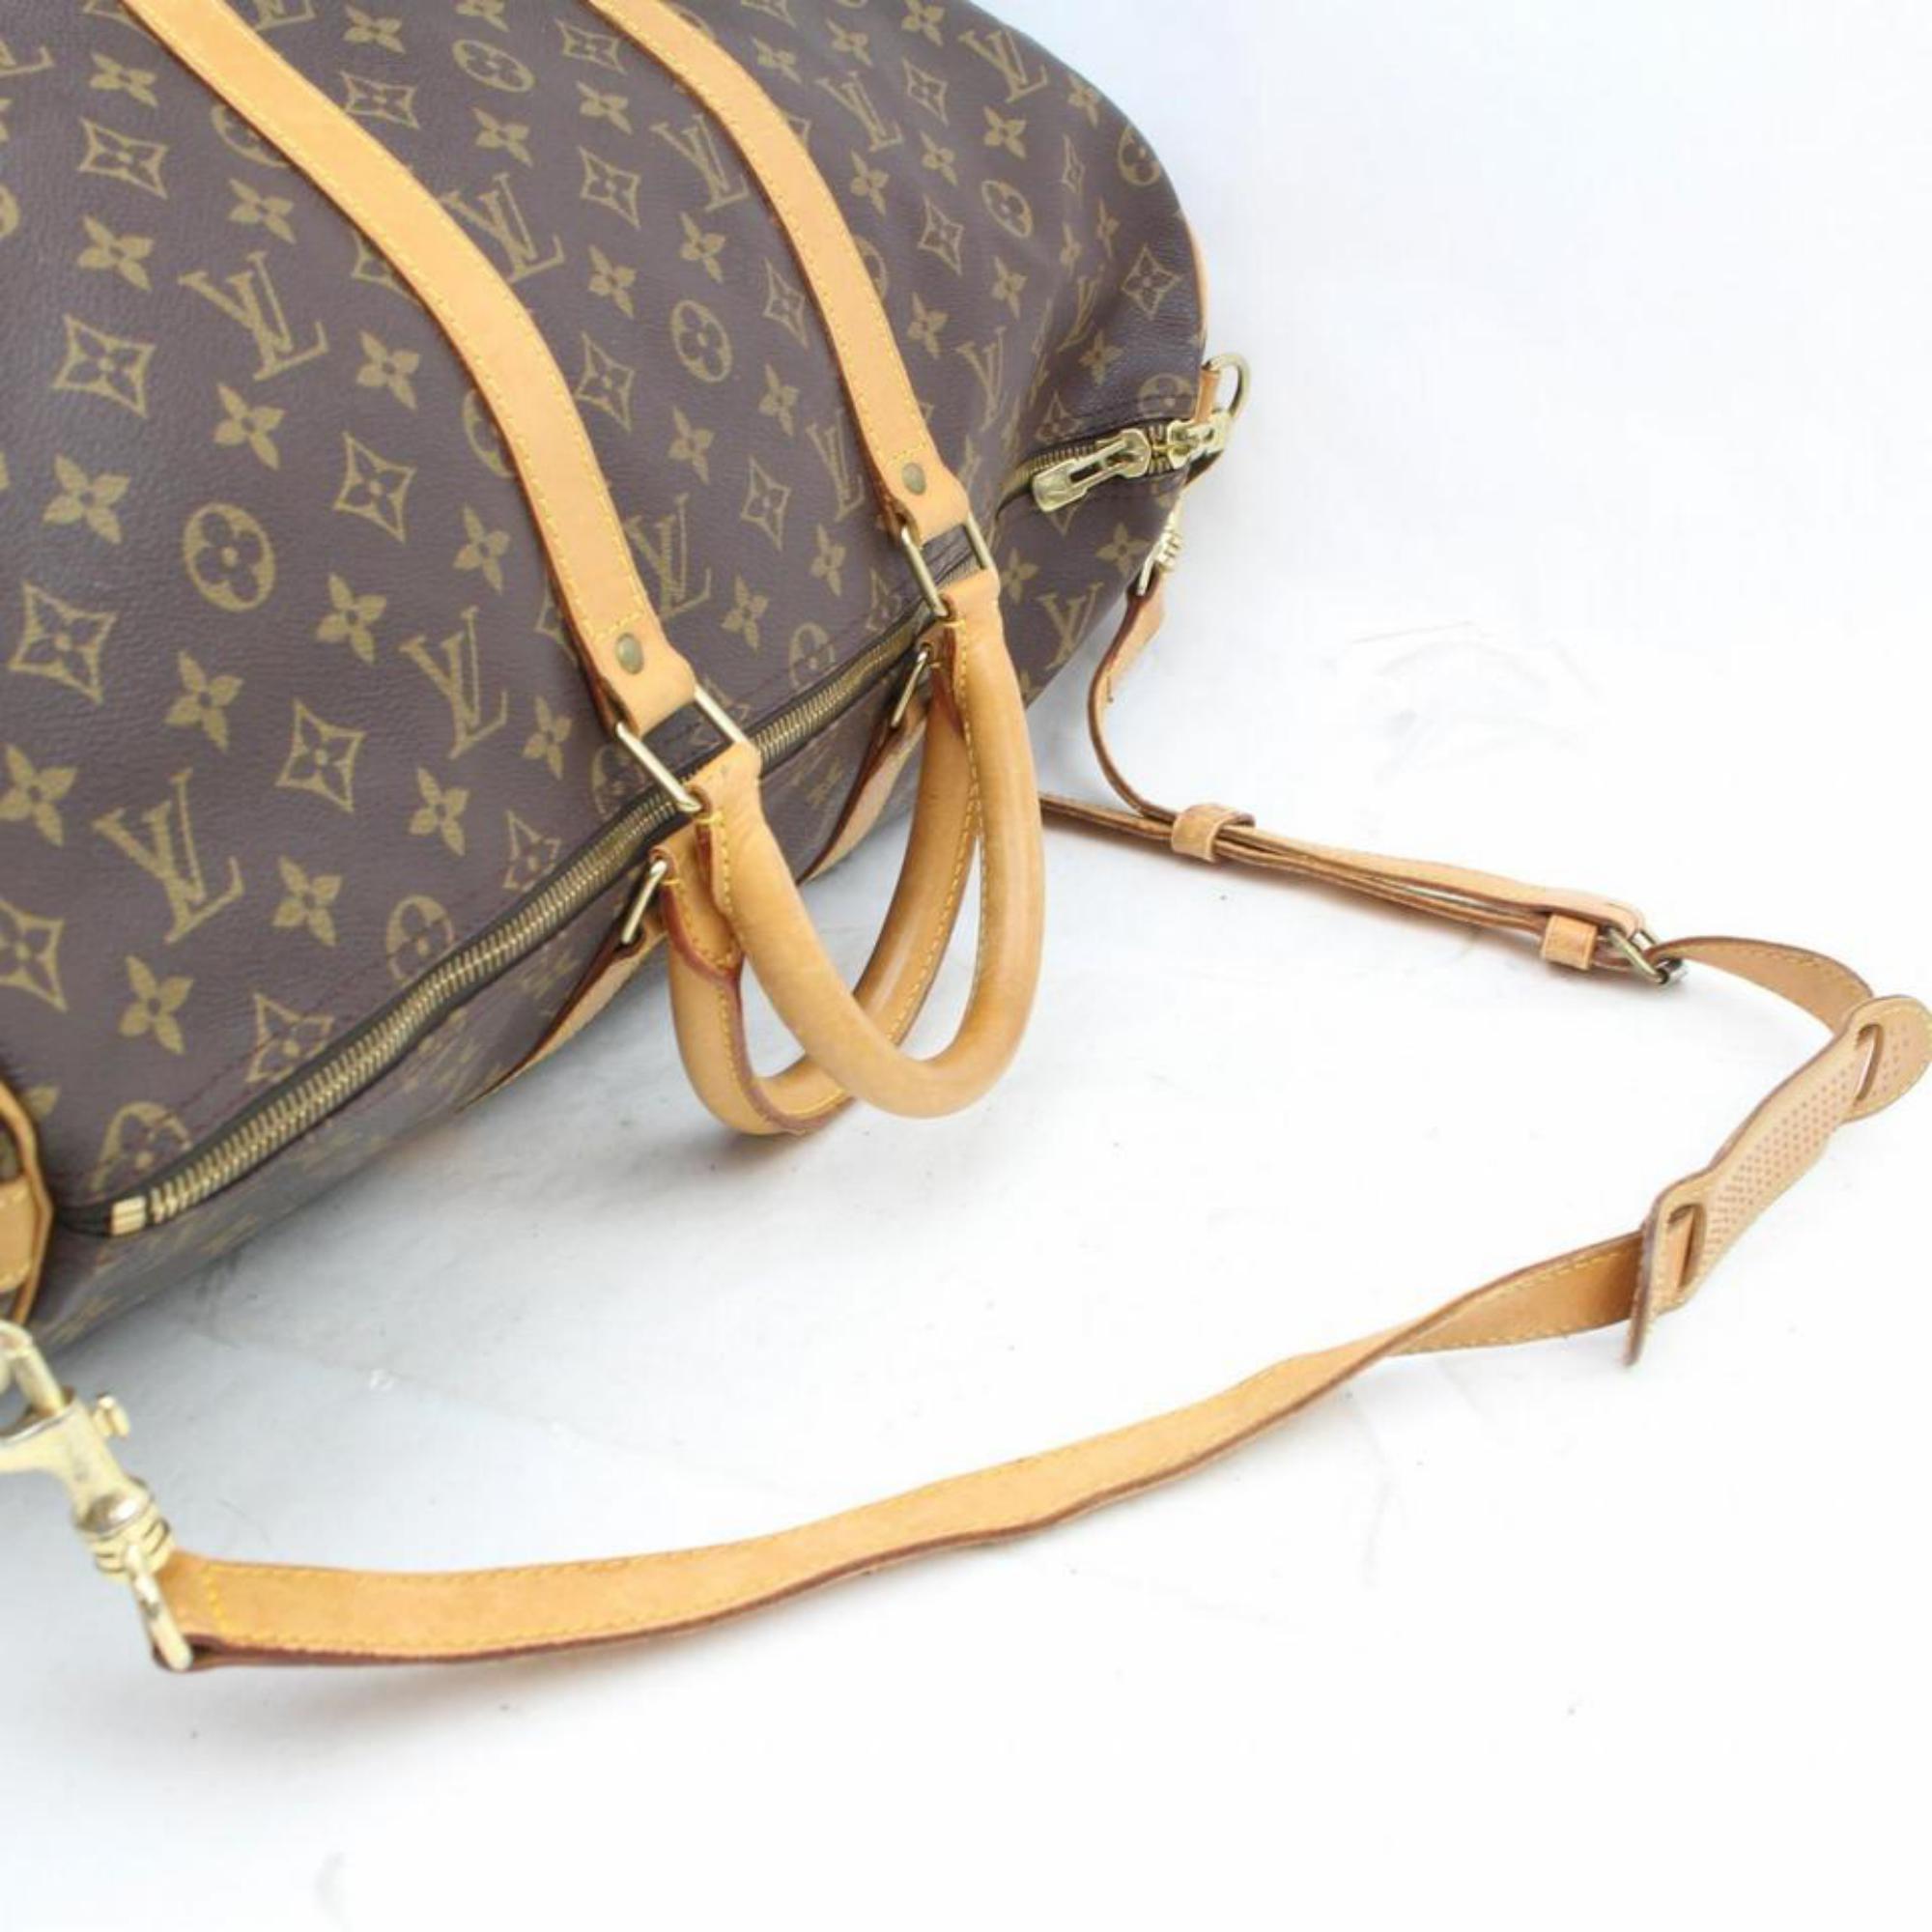 Louis Vuitton Keepall Duffle Monogram Bandouliere 50 869035 Weekend/Travel Bag For Sale 5